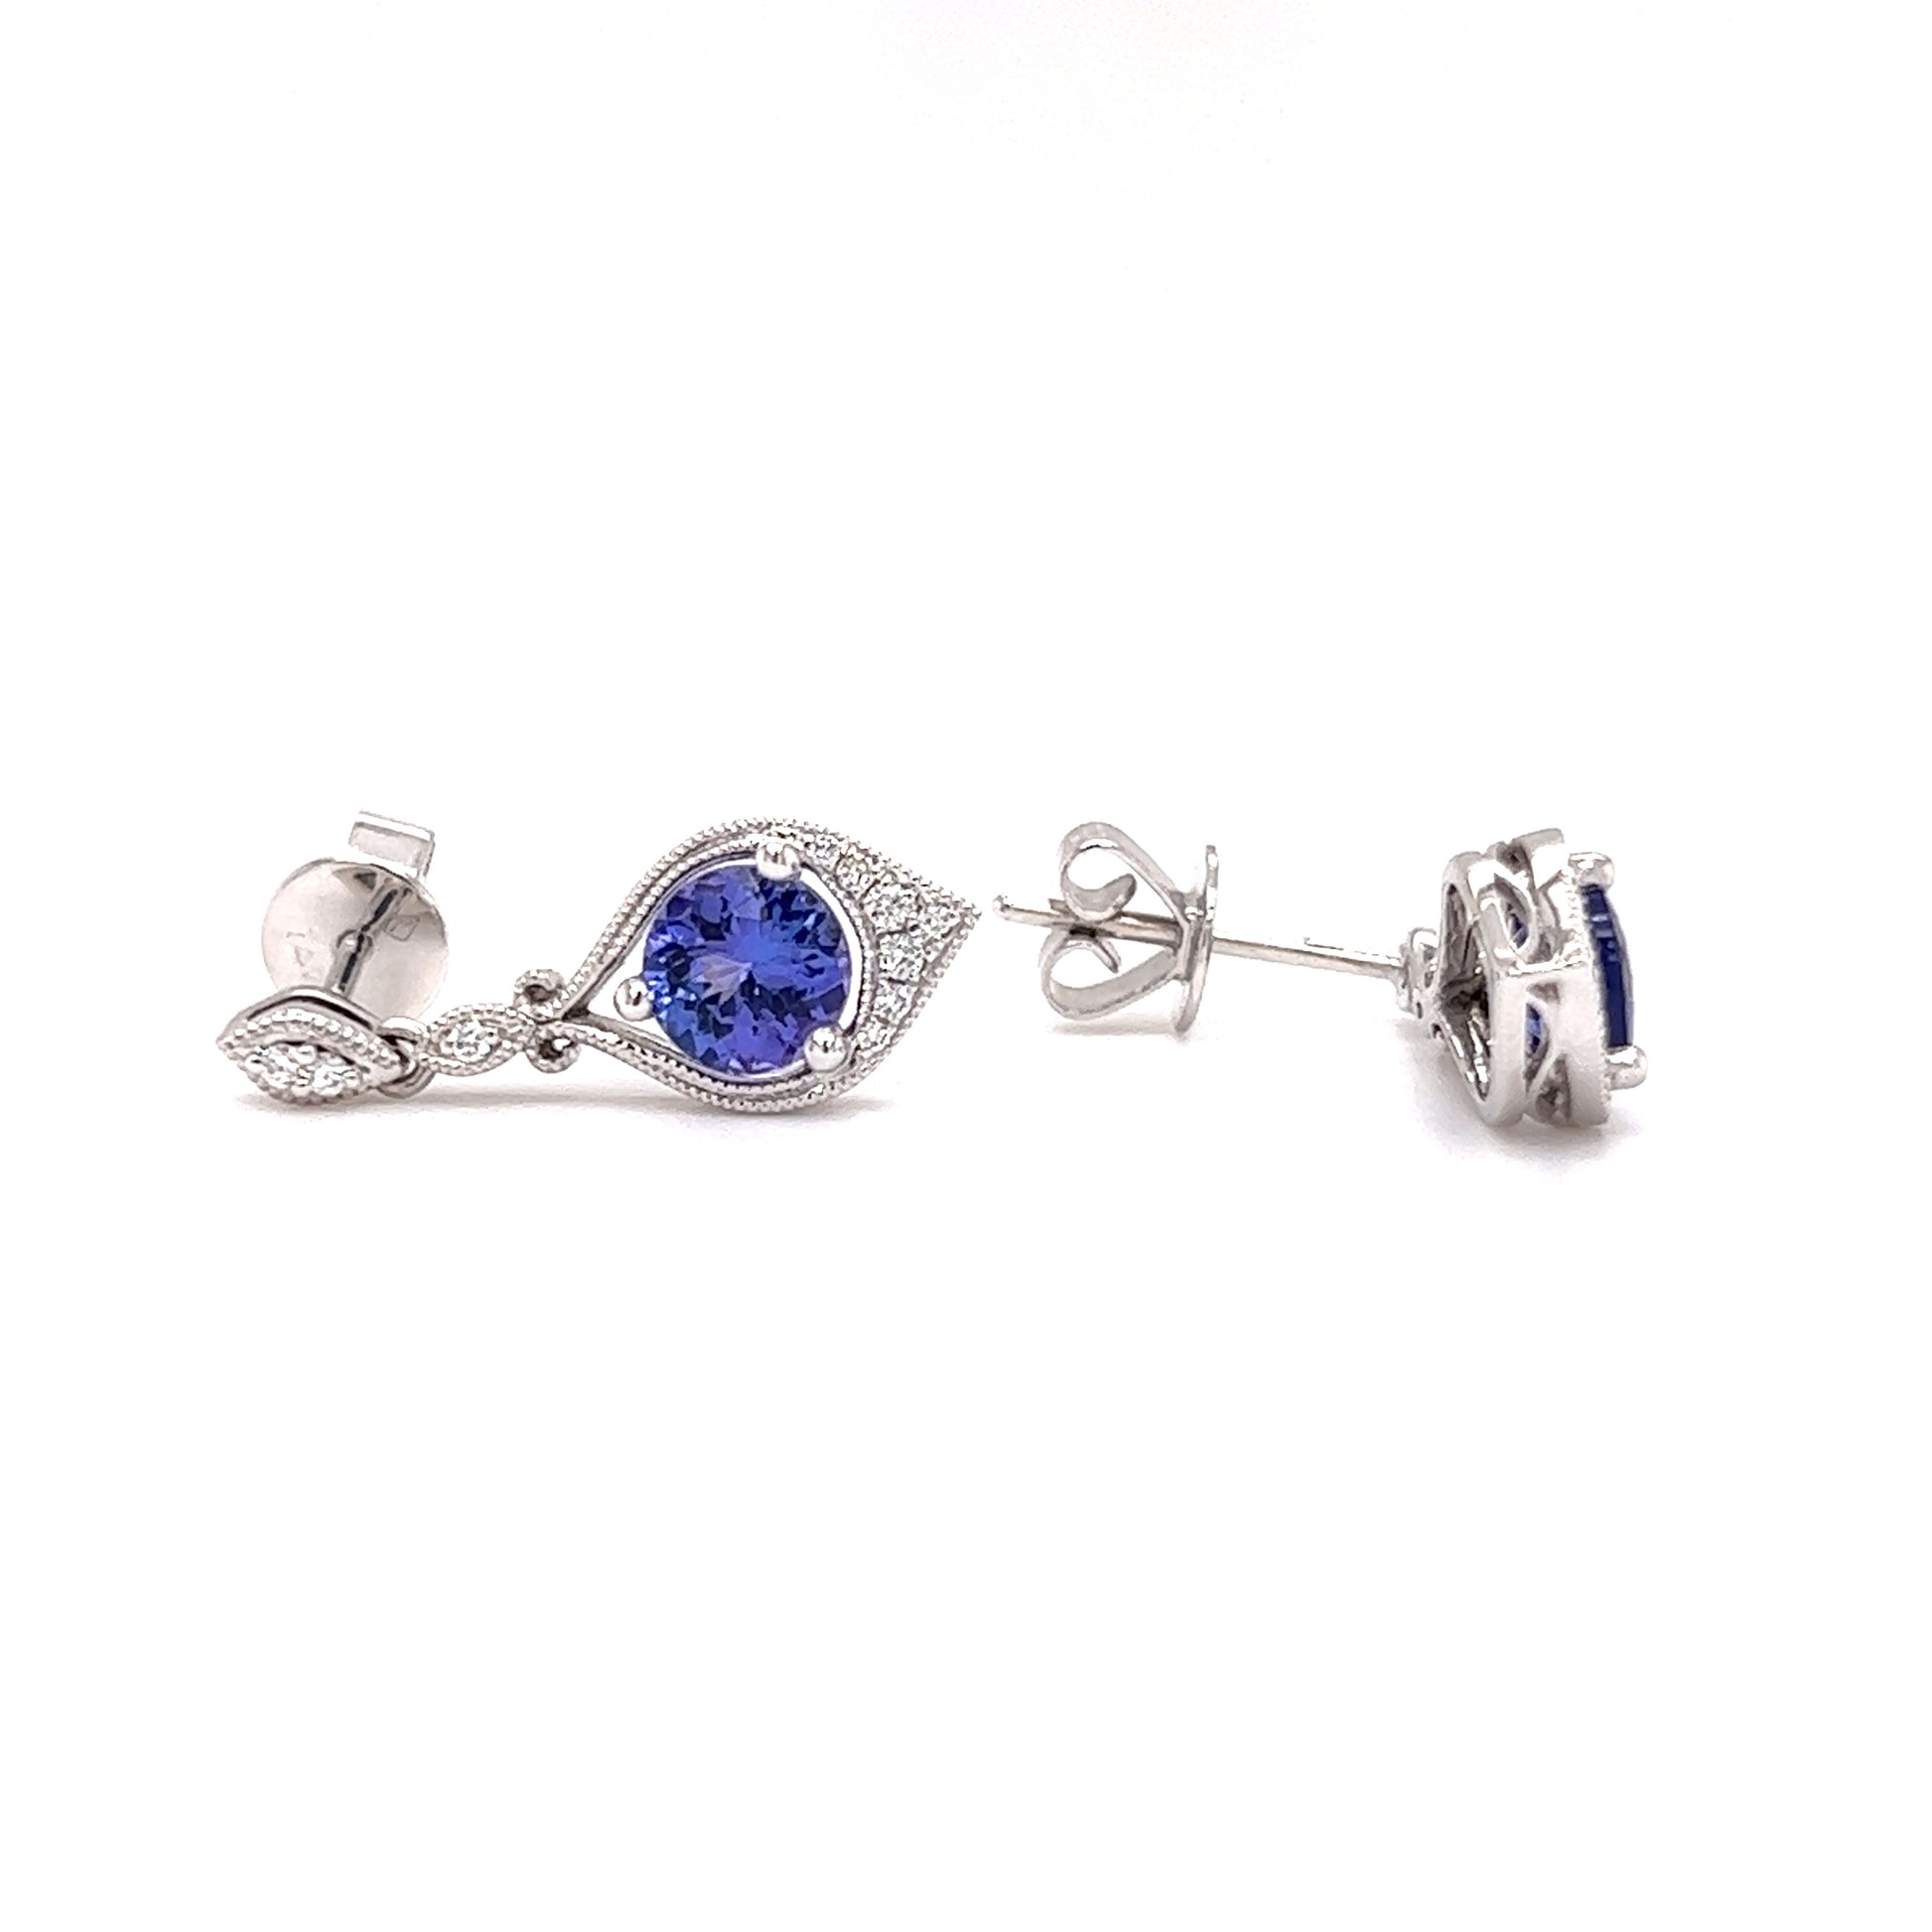 Round Tanzanite Drop Earrings with Twenty Diamonds in 14K White Gold Front and Side View